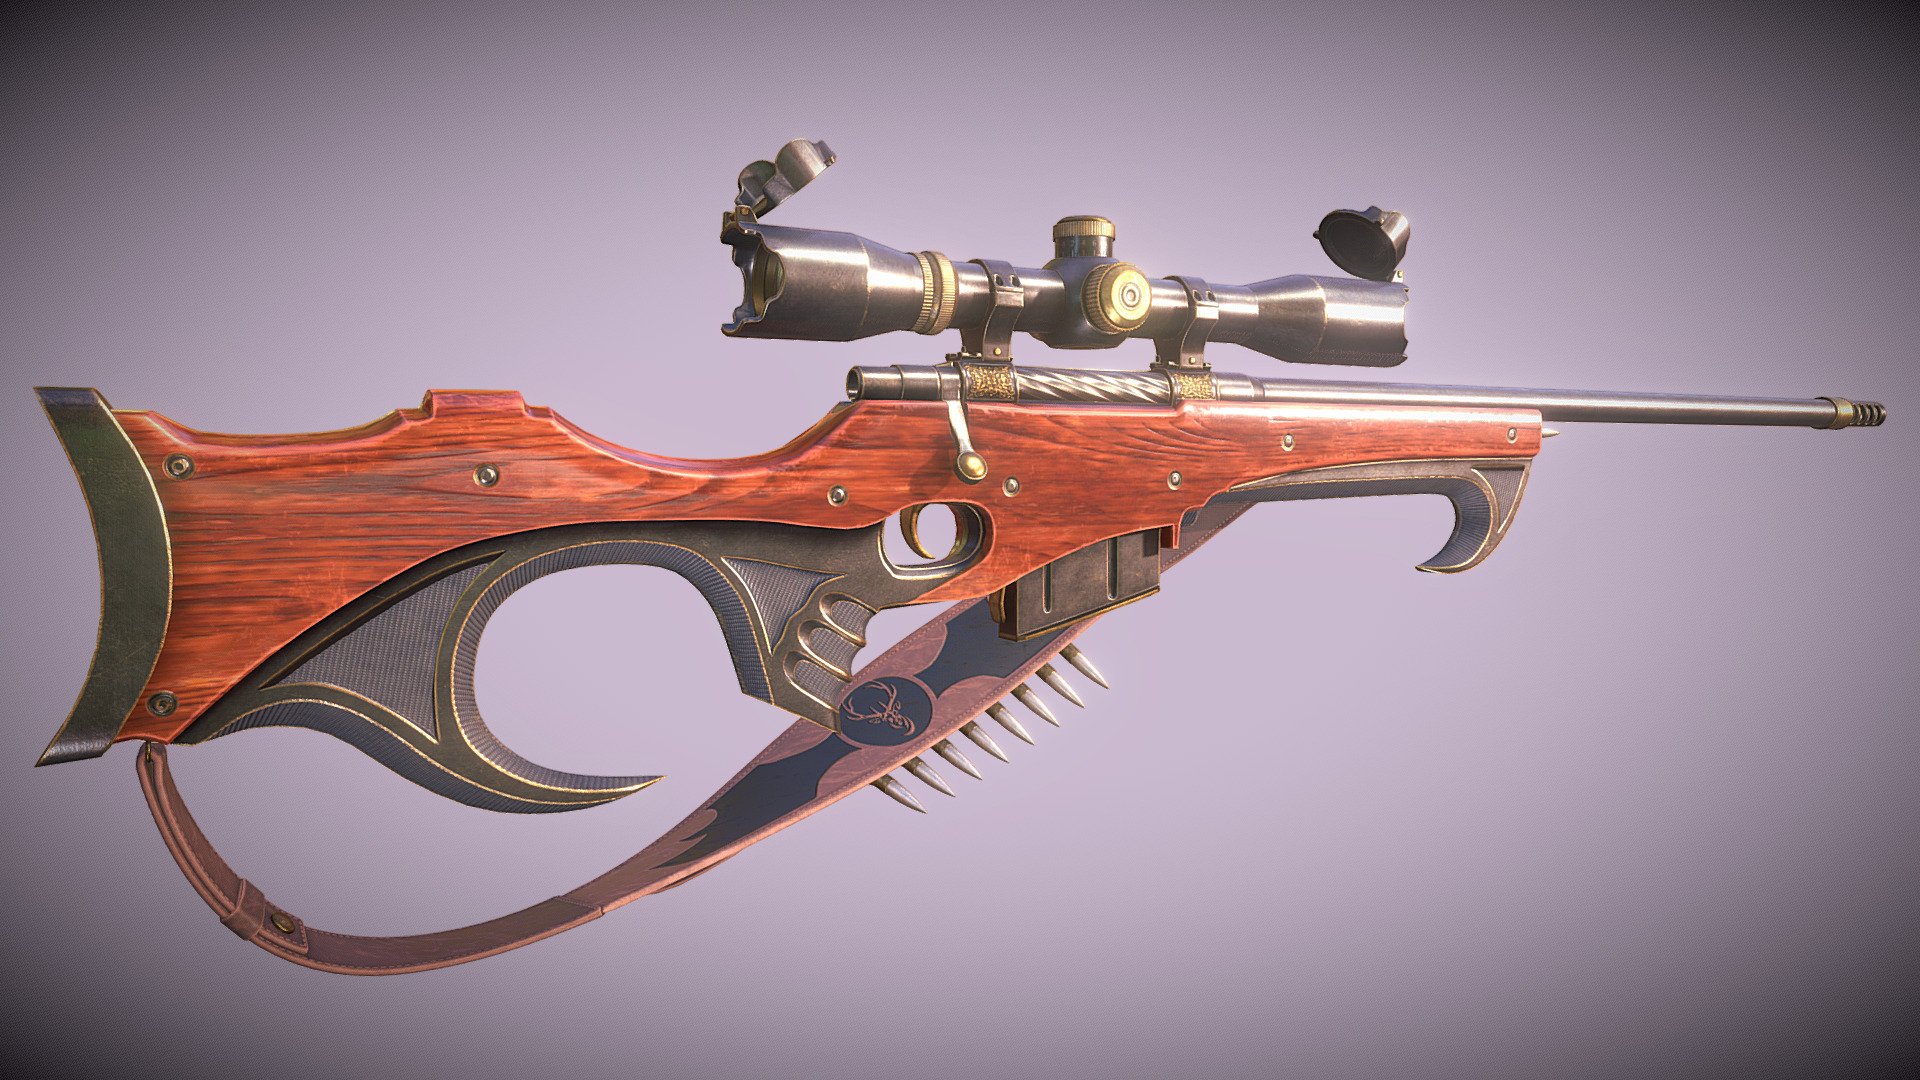 It's been a while since my last model because i took part of an internship at AlteregoGames. and after that i had a big school project. I had alot of spare time during my summerbreak and i also wanted to make a gun/rifle for the longest time. So i decided to make my own Sniper rifle in a realistic style. Enjoy! 

You can also check out some renders to have a better look:

https://www.artstation.com/artwork/yJWxy5 

Specs: 

Basegun and leather textures are 4k (you can downscale for ingame use) the rest of the textures are 2k

21 meshes (for baking, but you can merge everything for rigging)

Working bolt system for animation 

5 Texture sets for high quality textures

Optimized mesh for game engine

Not rigged / Animated

Includes the following files:


Blender Project file
Substance Painter Project file
Photoshop files for specific custom alpha's
 - Elegant Sniper Rifle - Buy Royalty Free 3D model by Mitchell Bekke (@MitchellBekke) 3d model